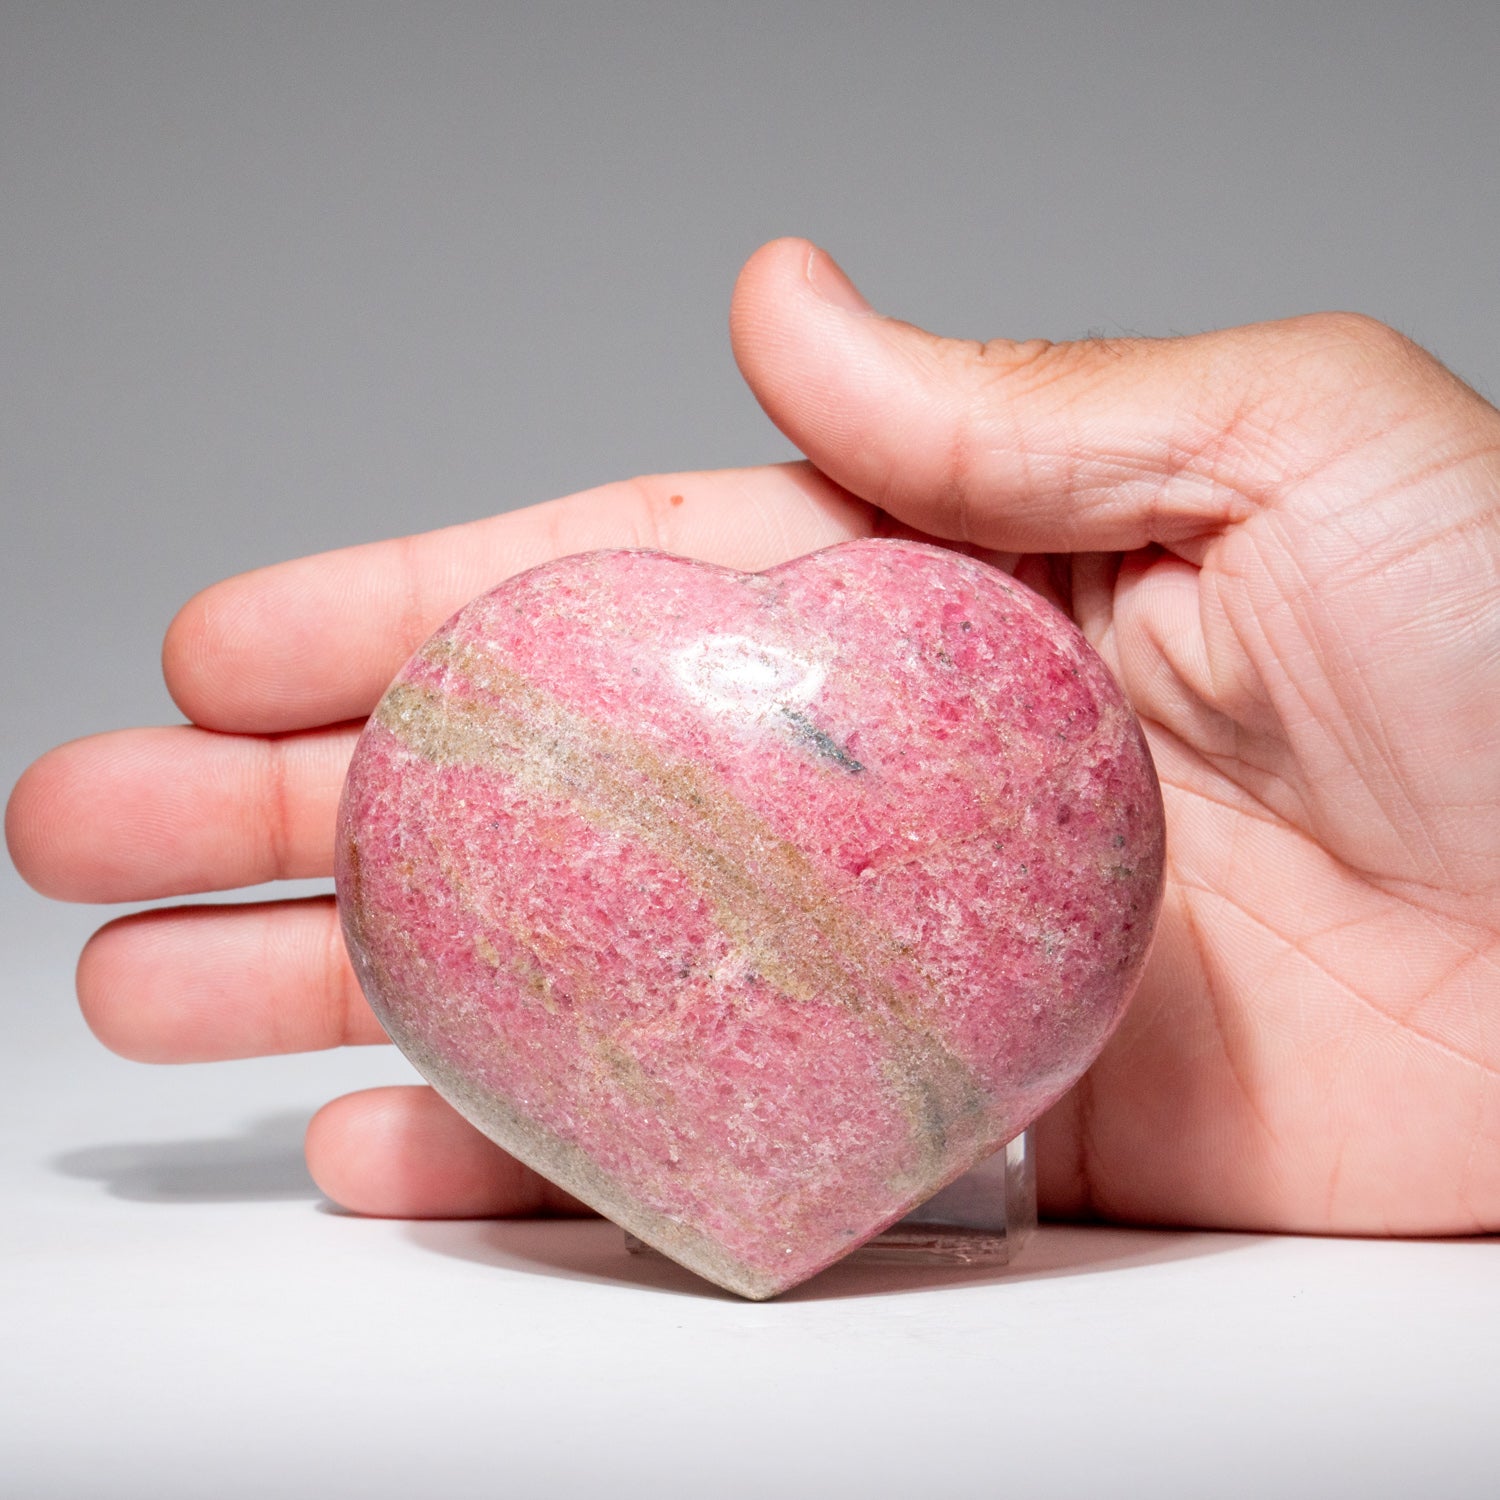 Polished Imperial Rhodonite Heart from Madagascar (468.4 grams)